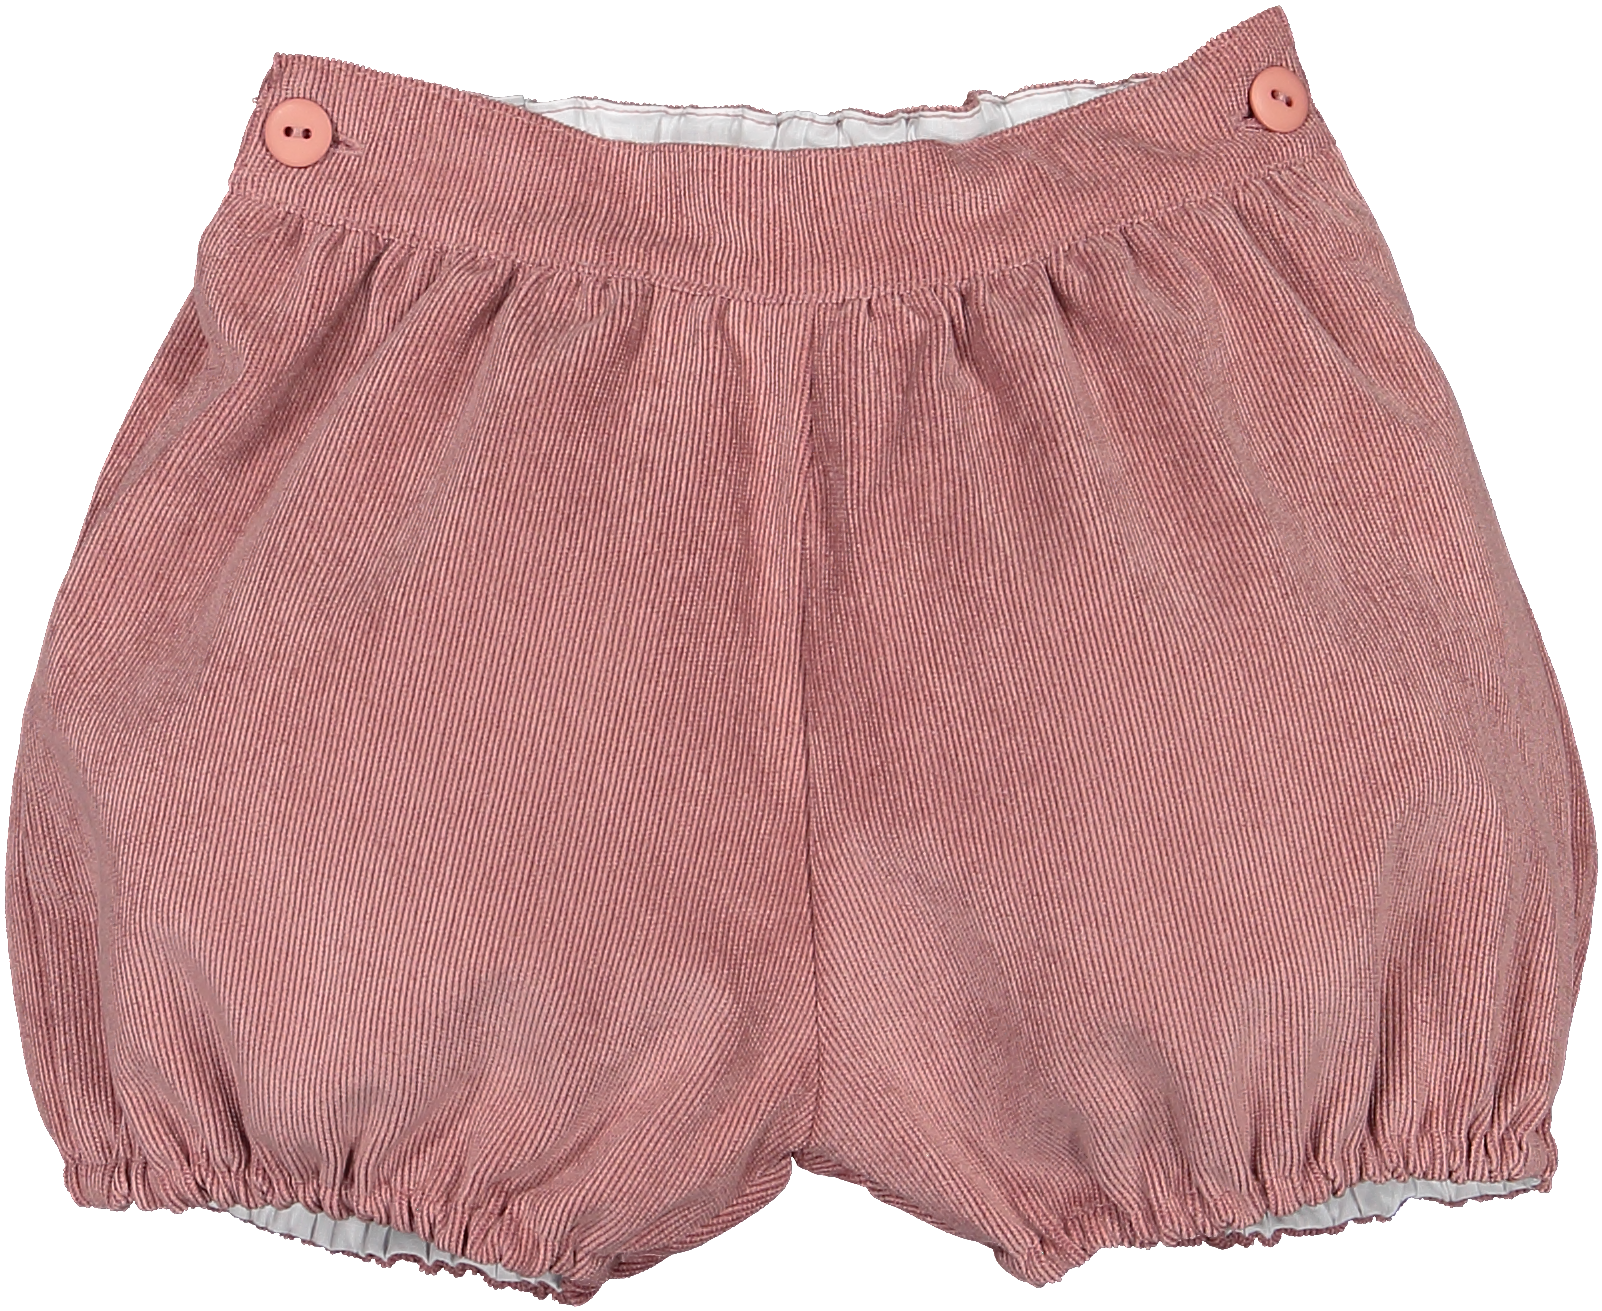 Mauve corduroy girls bubble shorts with button enclosure and gathered banding on legs by Sal & Pimenta. 